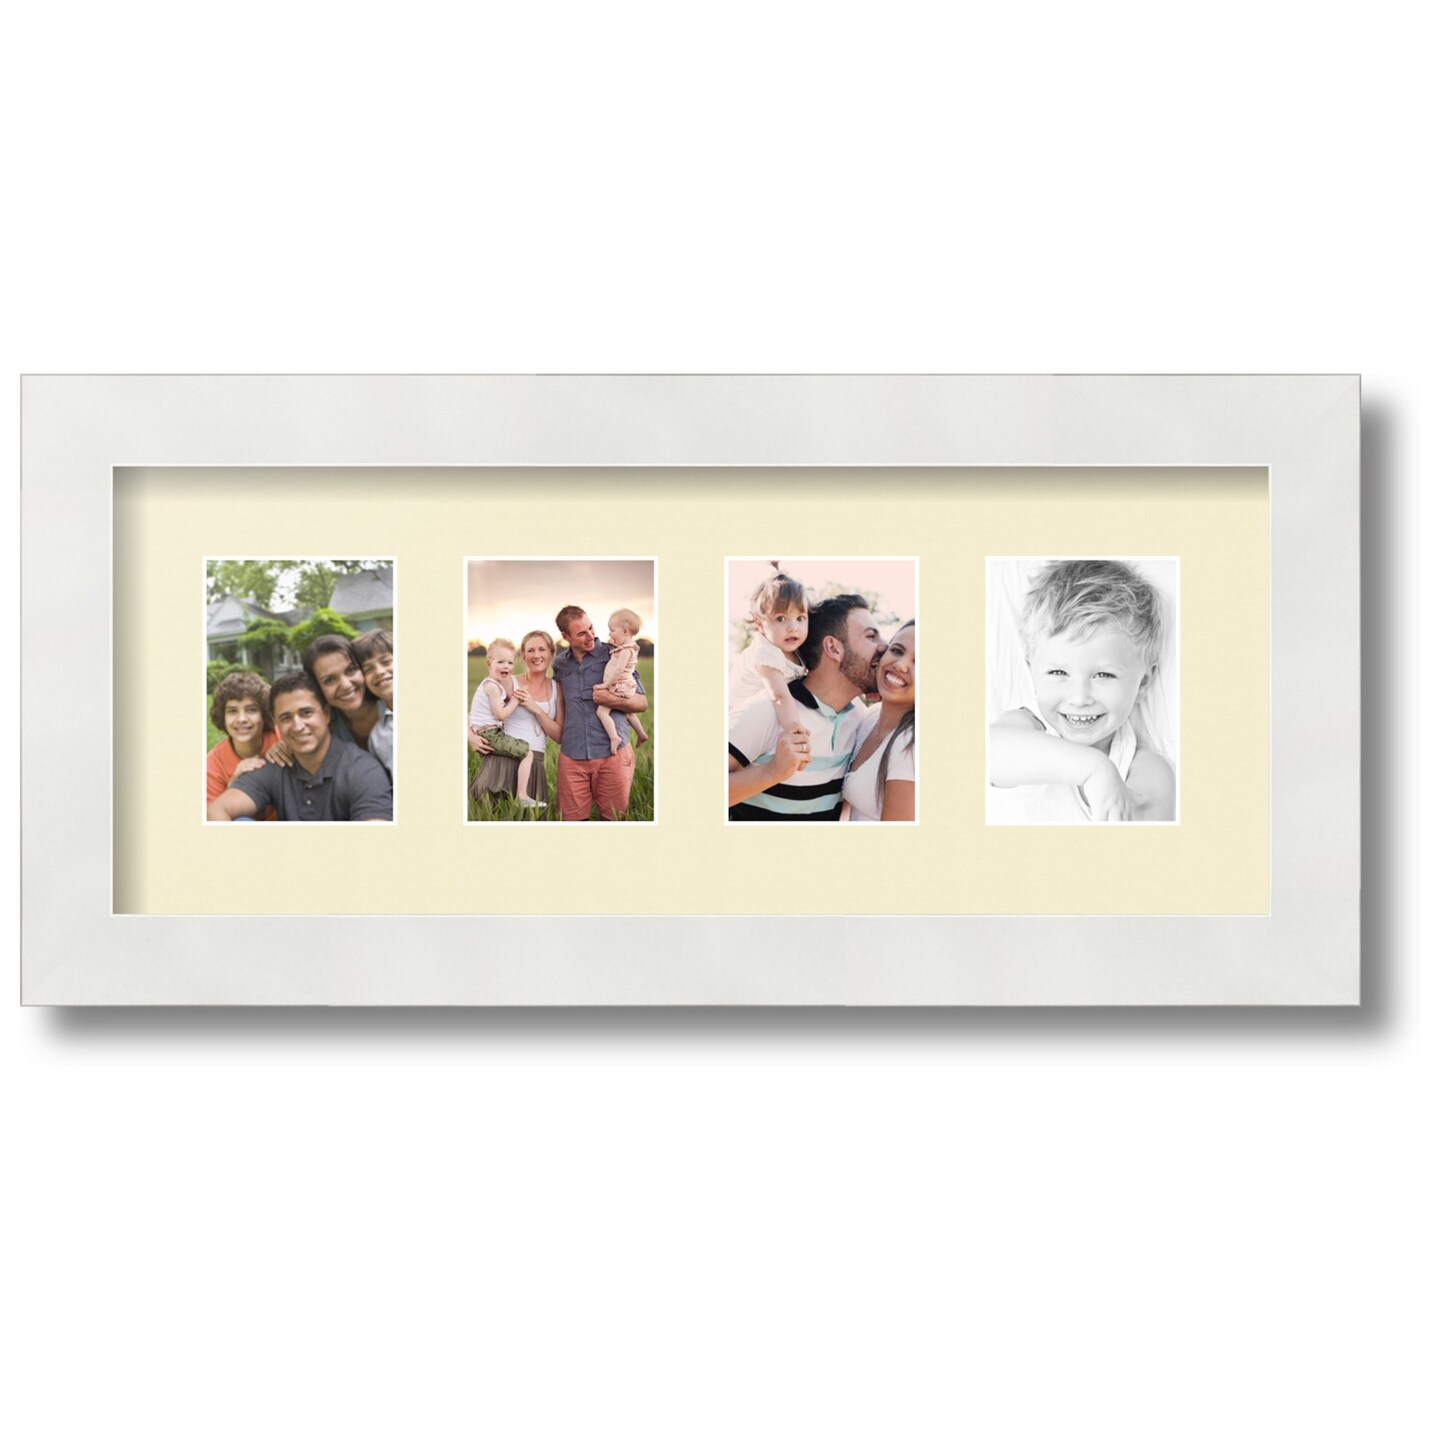 ArtToFrames Collage Photo Picture Frame with 4 - 2.5x3.5 inch Openings, Framed in White with Over 62 Mat Color Options and Regular Glass (CSM-3966-20)